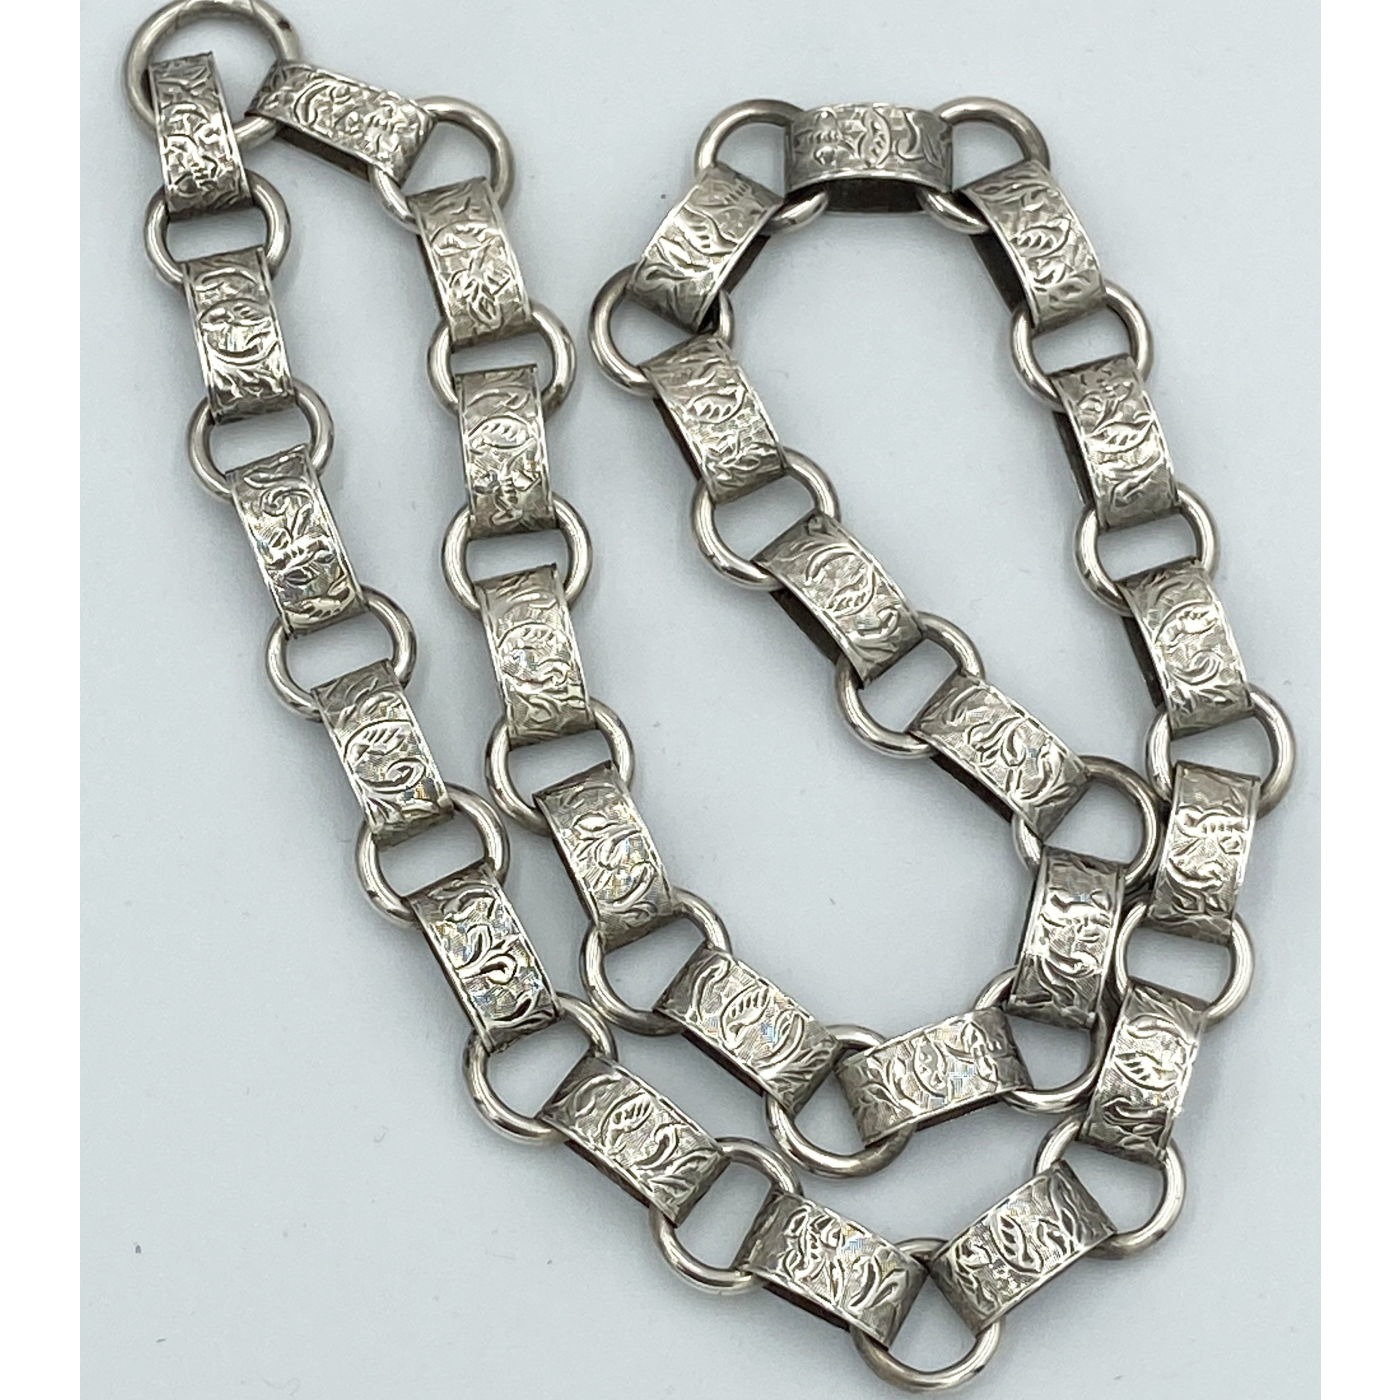 18" Wonderful Swirl Link & Ring Highly Polished Antique English Silver Chain - Chain Only